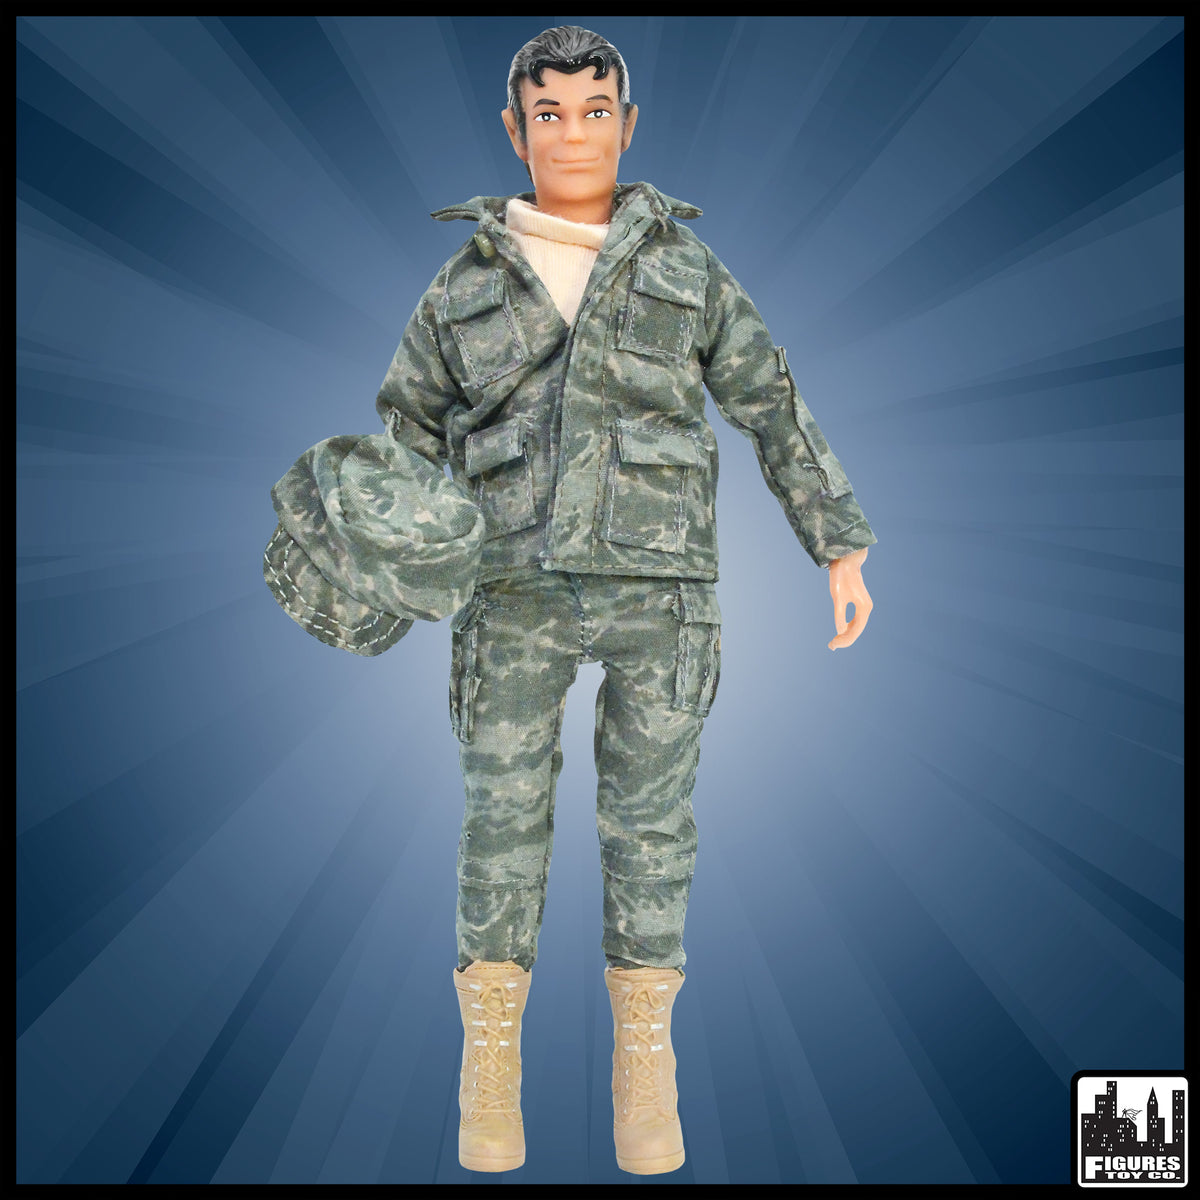 8 Inch Airforce Military Action Figure